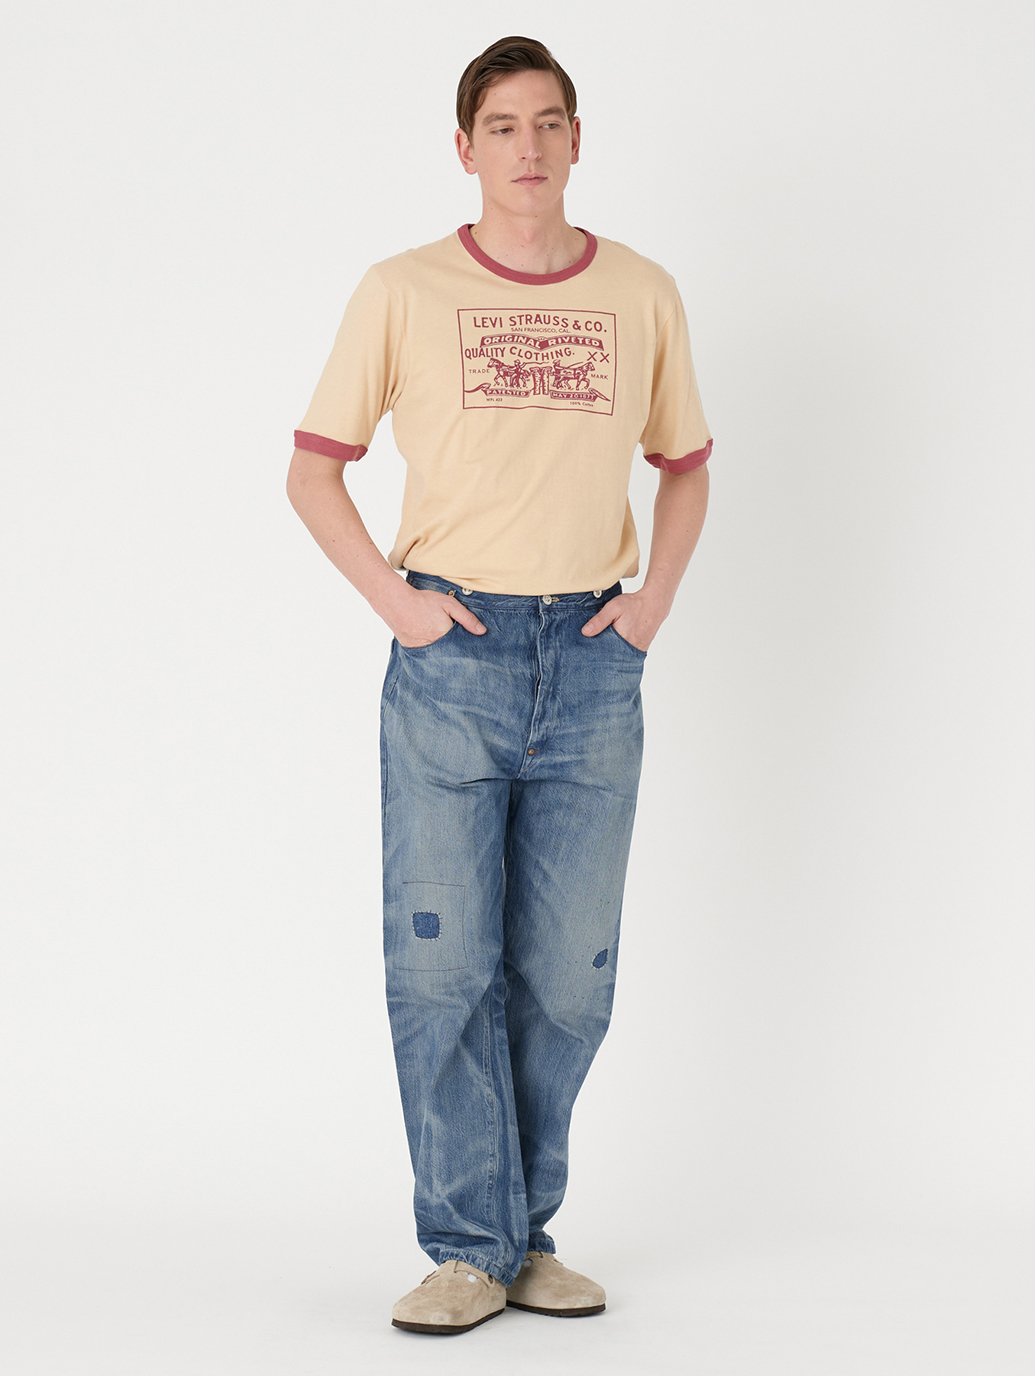 LEVI'S® VINTAGE CLOTHING 1870'S NEVADA OVRALL SIERRA インディゴ ...